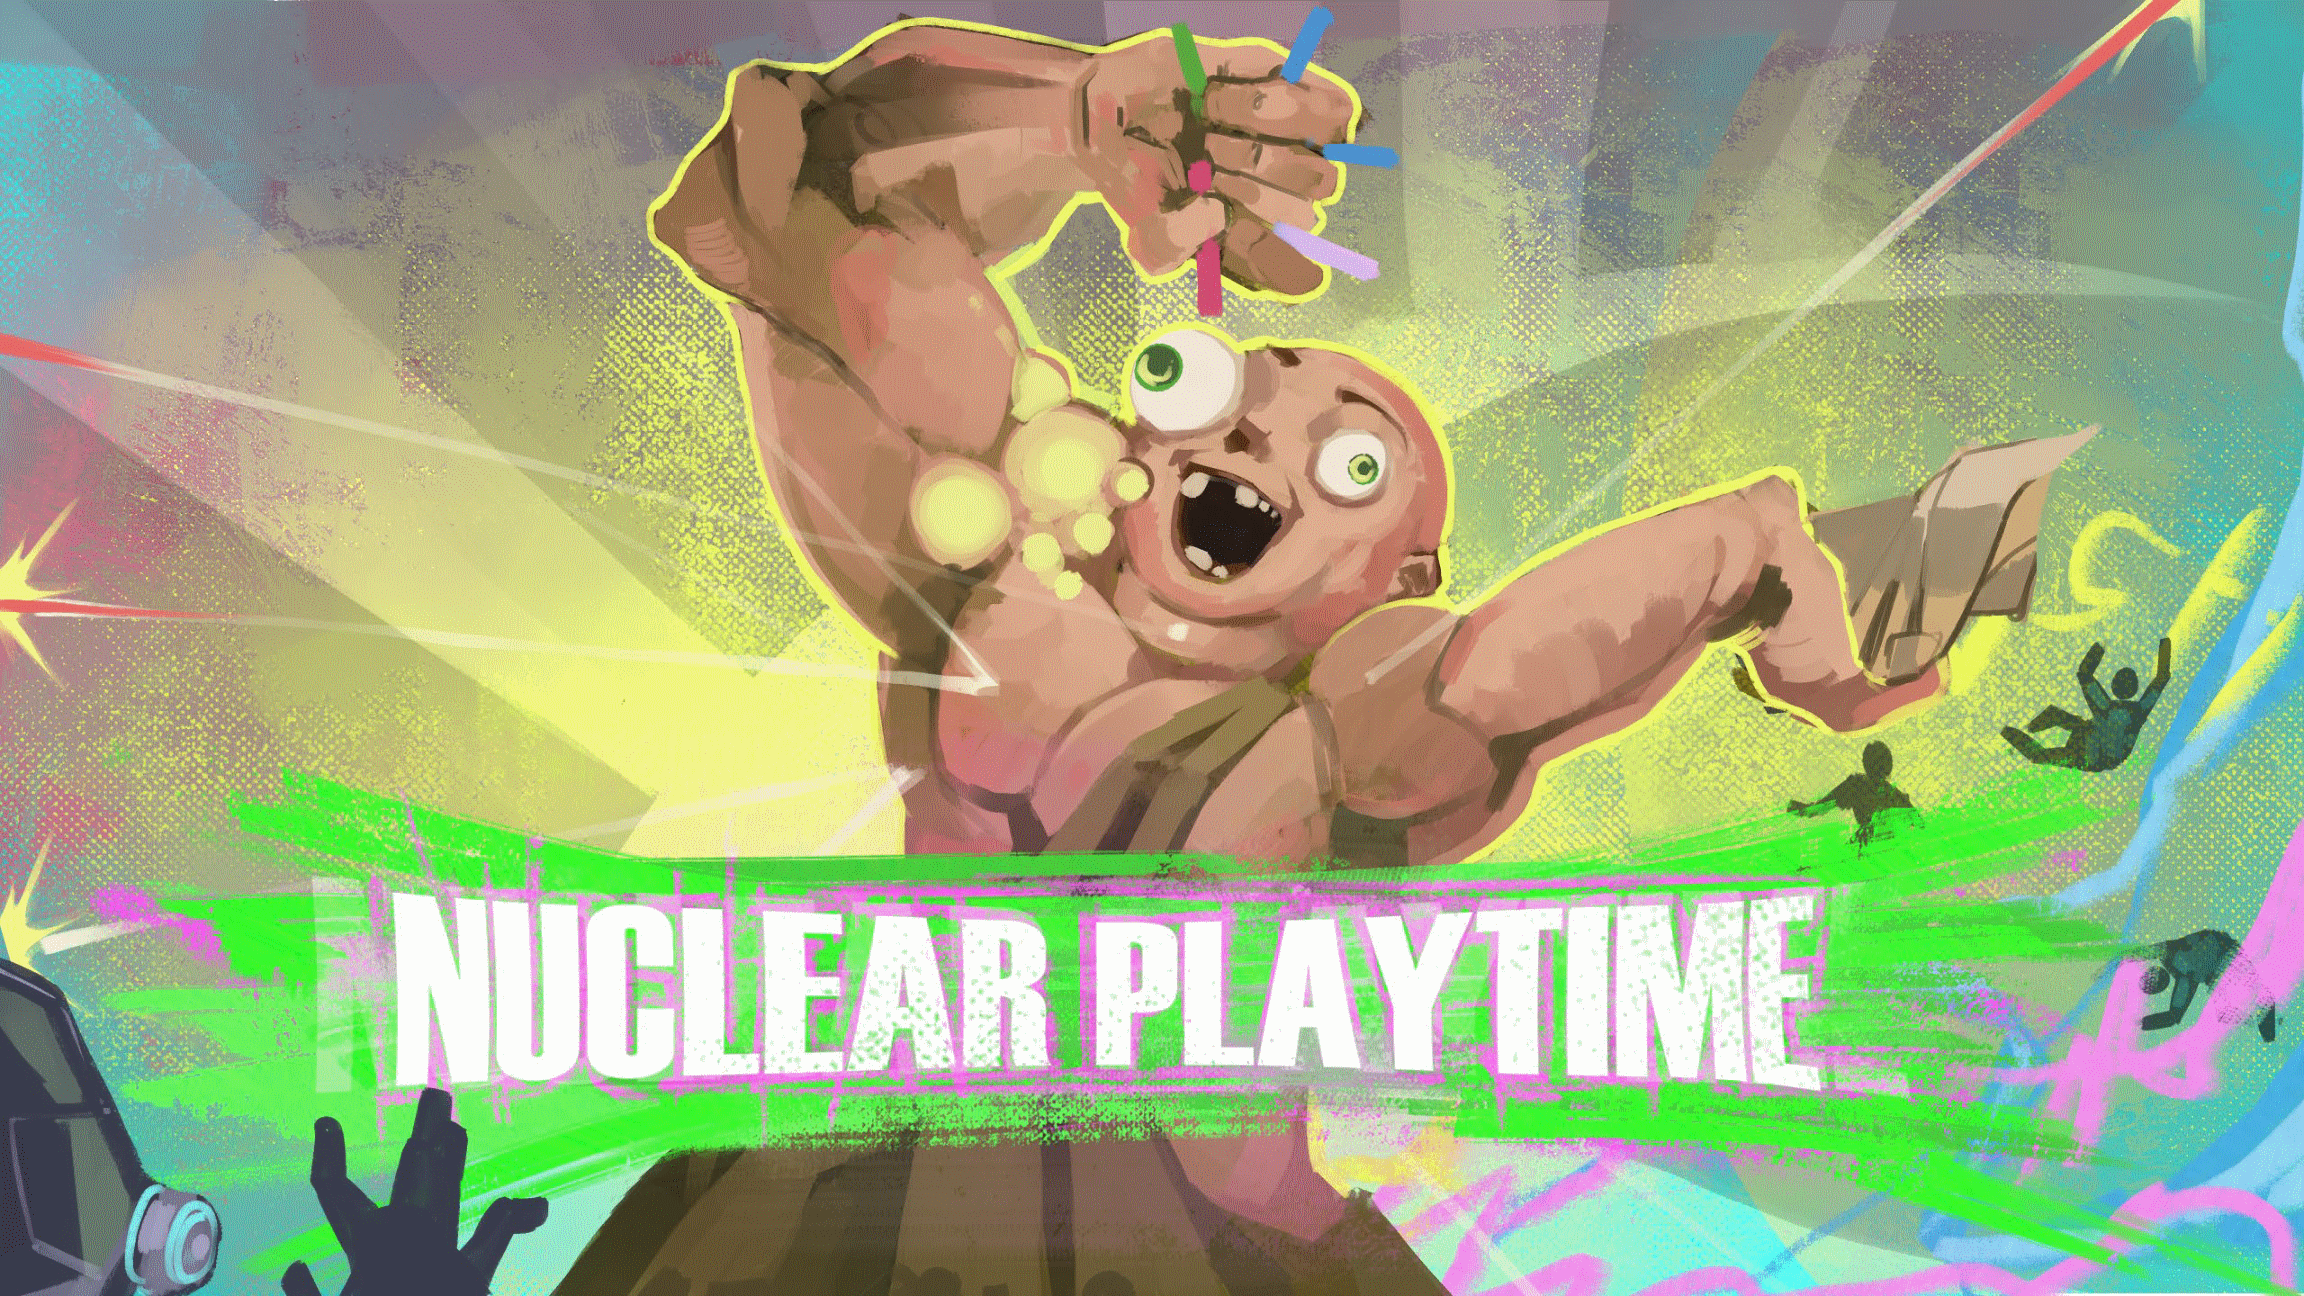 Nuclear Playtime